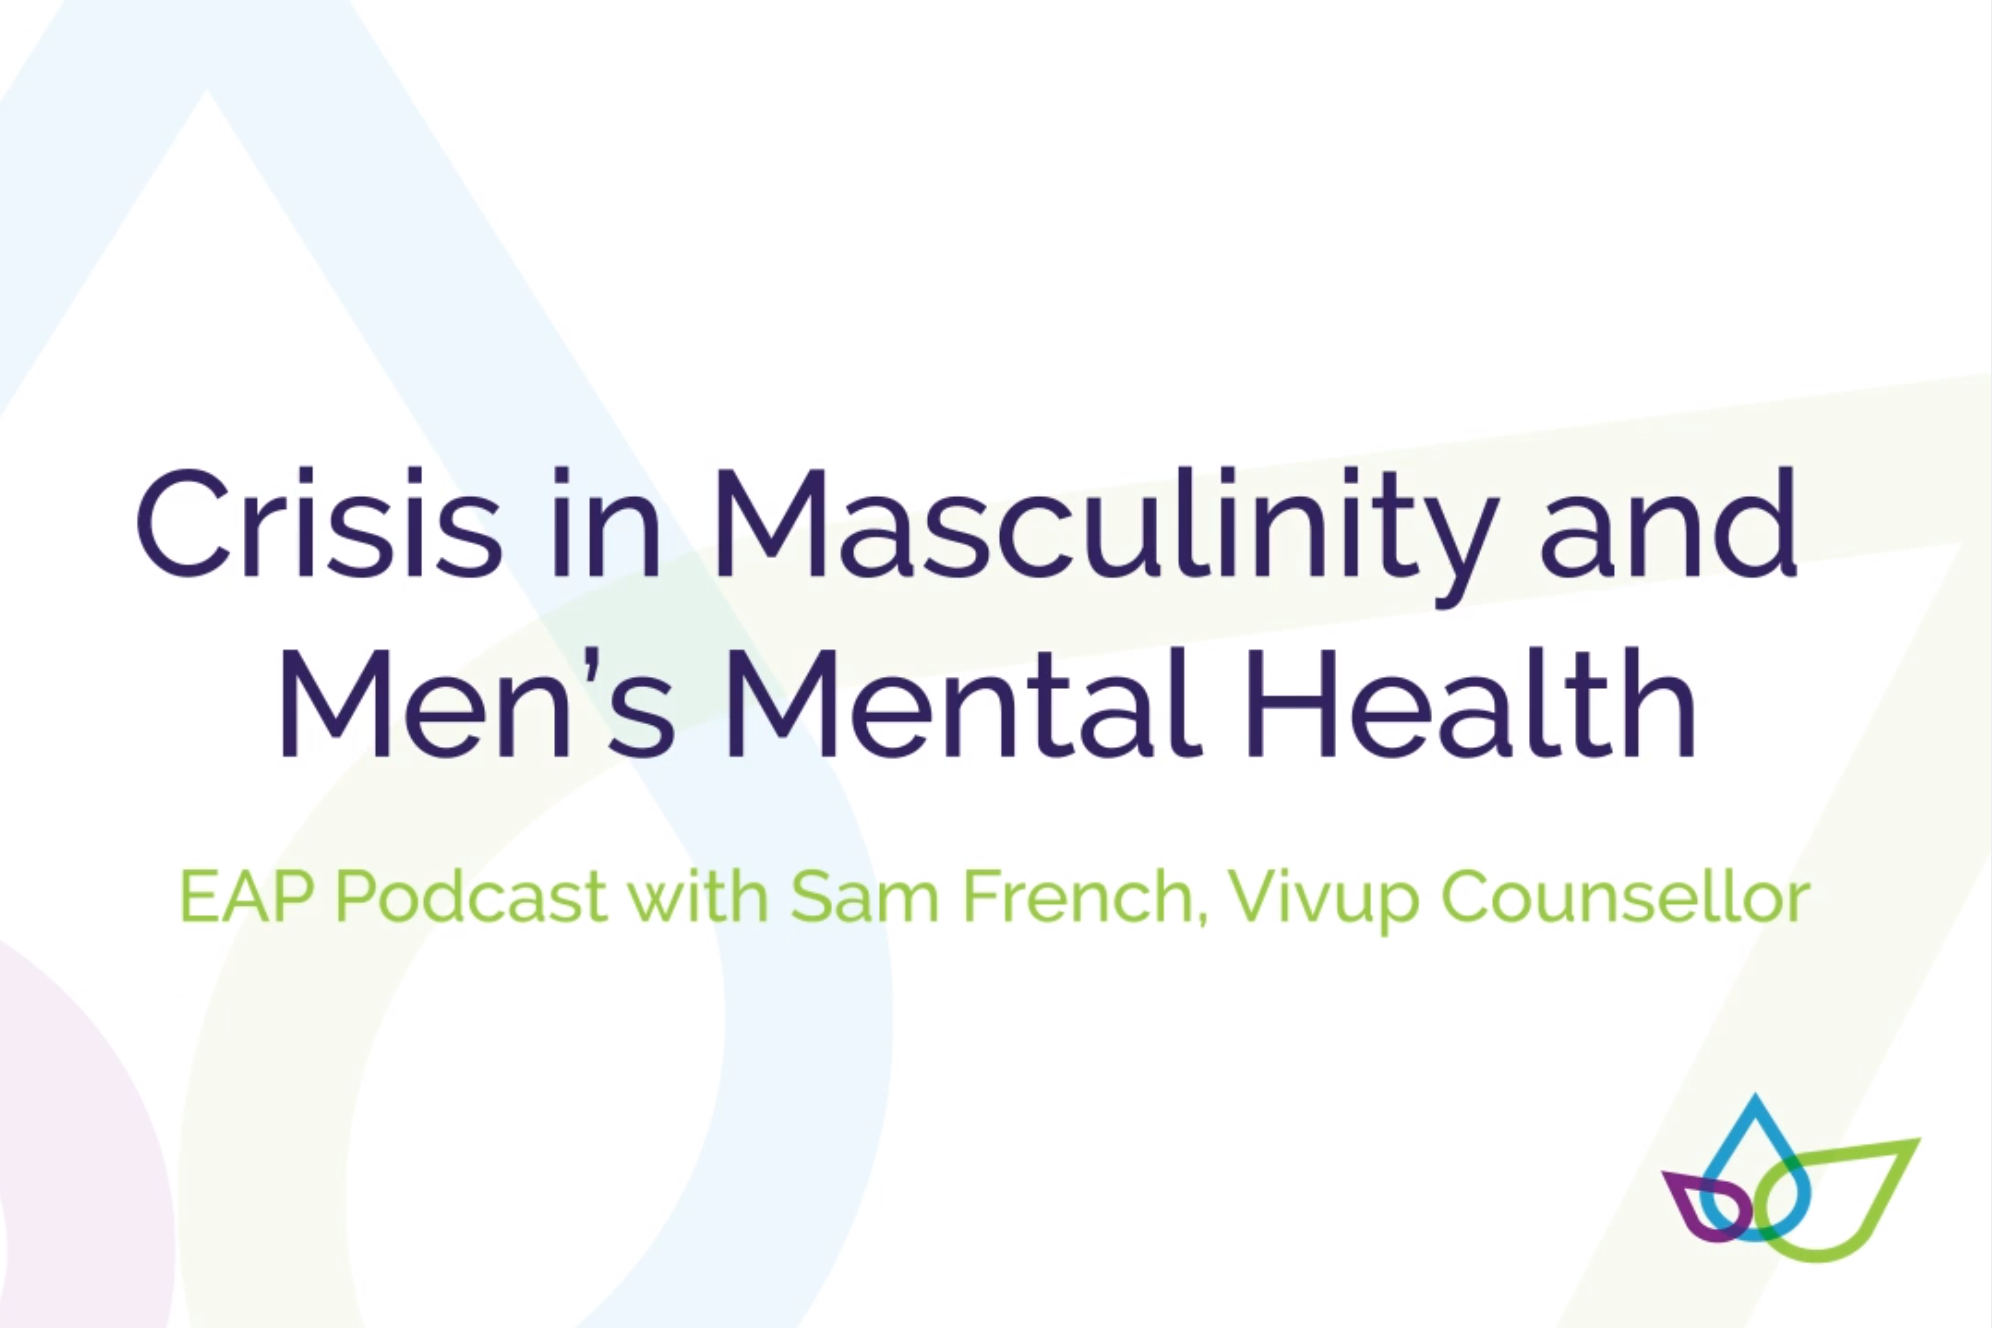 Crisis in Masculinity and Men's Mental Health podcast